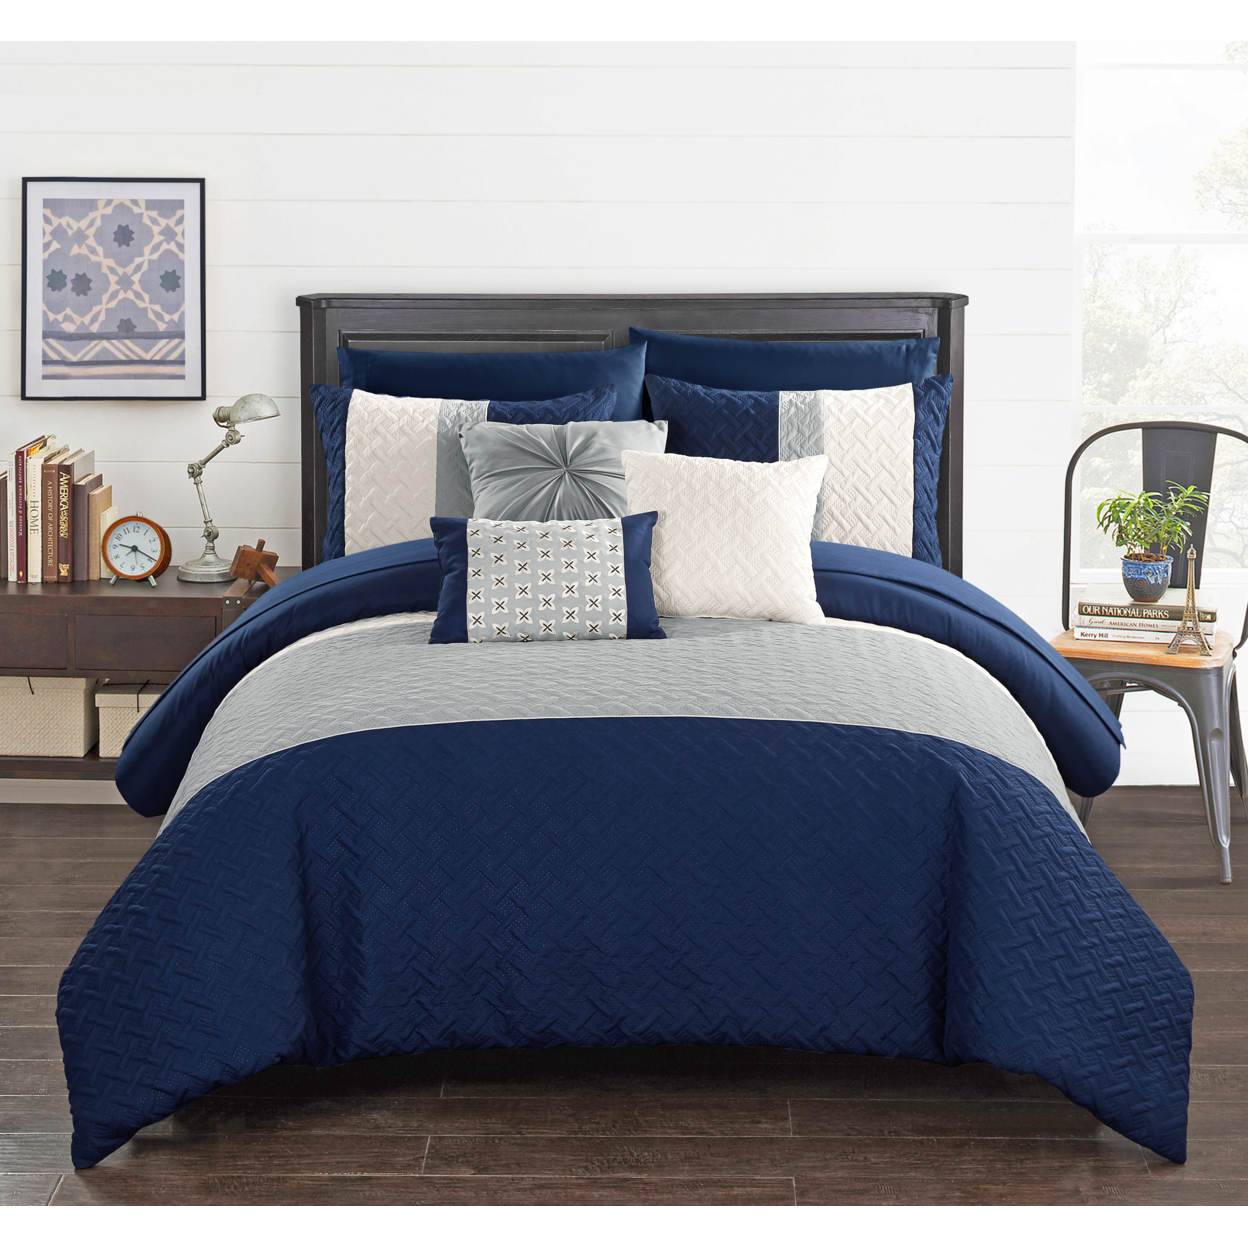 Chic Home Shaila 10 Or 8 Piece Comforter Set Color Block Quilted Embroidered Design Bed In A Bag Bedding - Navy, King